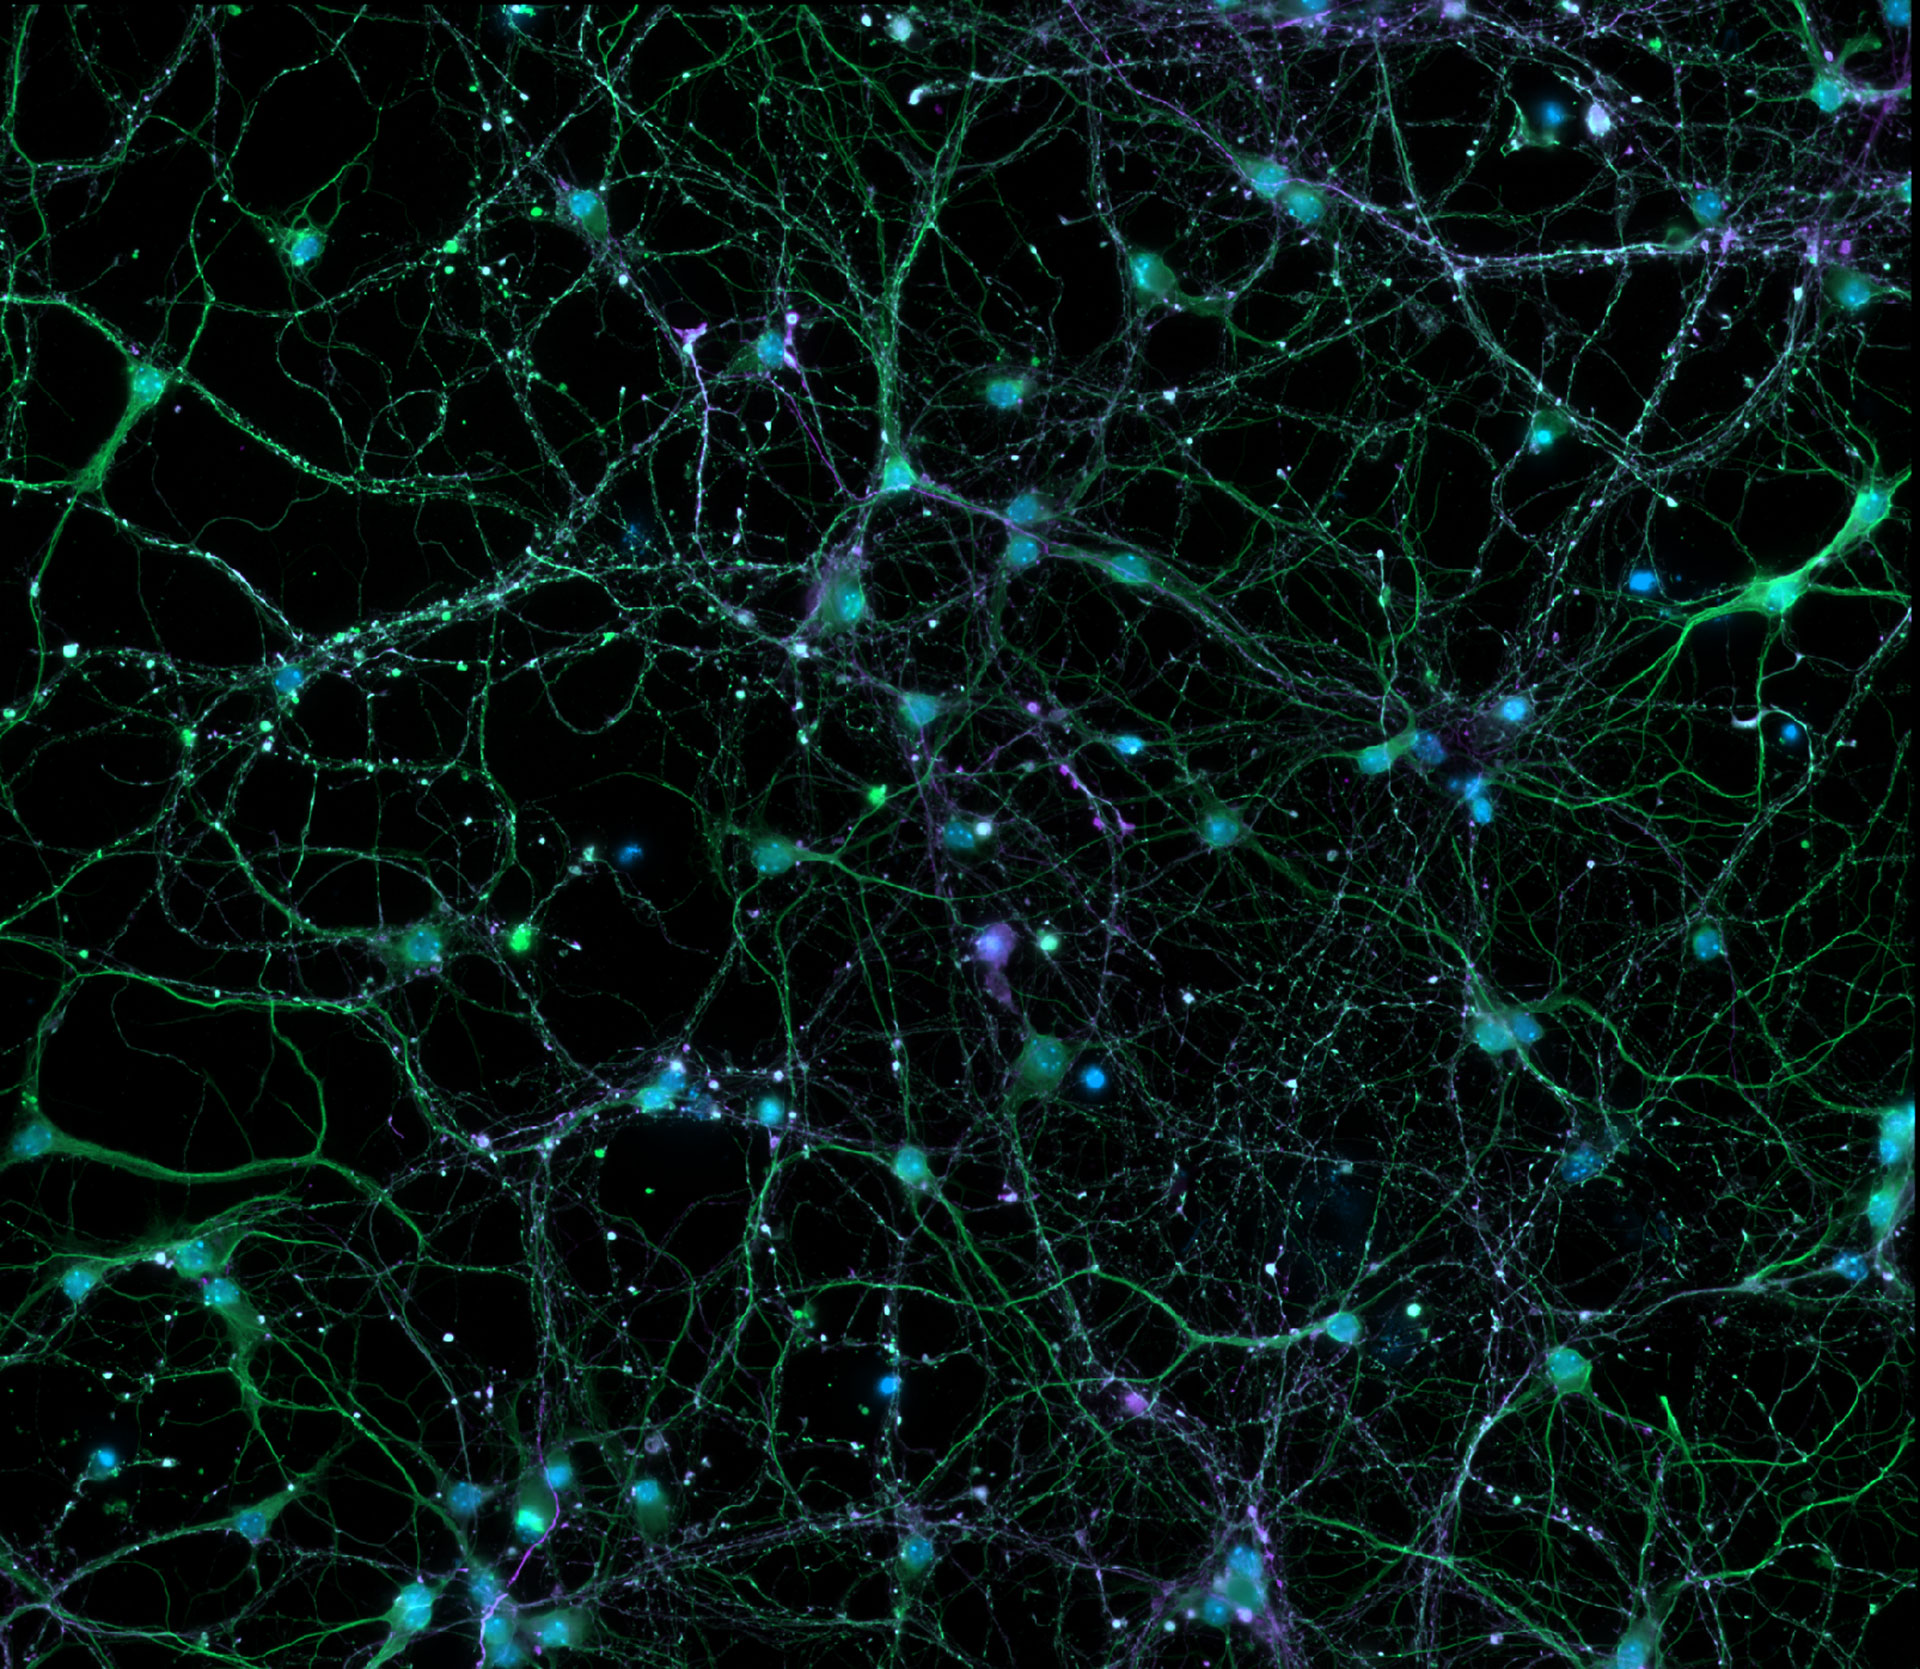 Cortical neurons stained for DNA, microtubules and microtubule-associated proteins. Courtesy: Leibniz-Institute on Aging – Fritz-Lipmann-Institut e.V. (FLI), Germany.  Courtesy: Leibniz-Institute on Aging – Fritz-Lipmann-Institut e.V. (FLI), Germany.